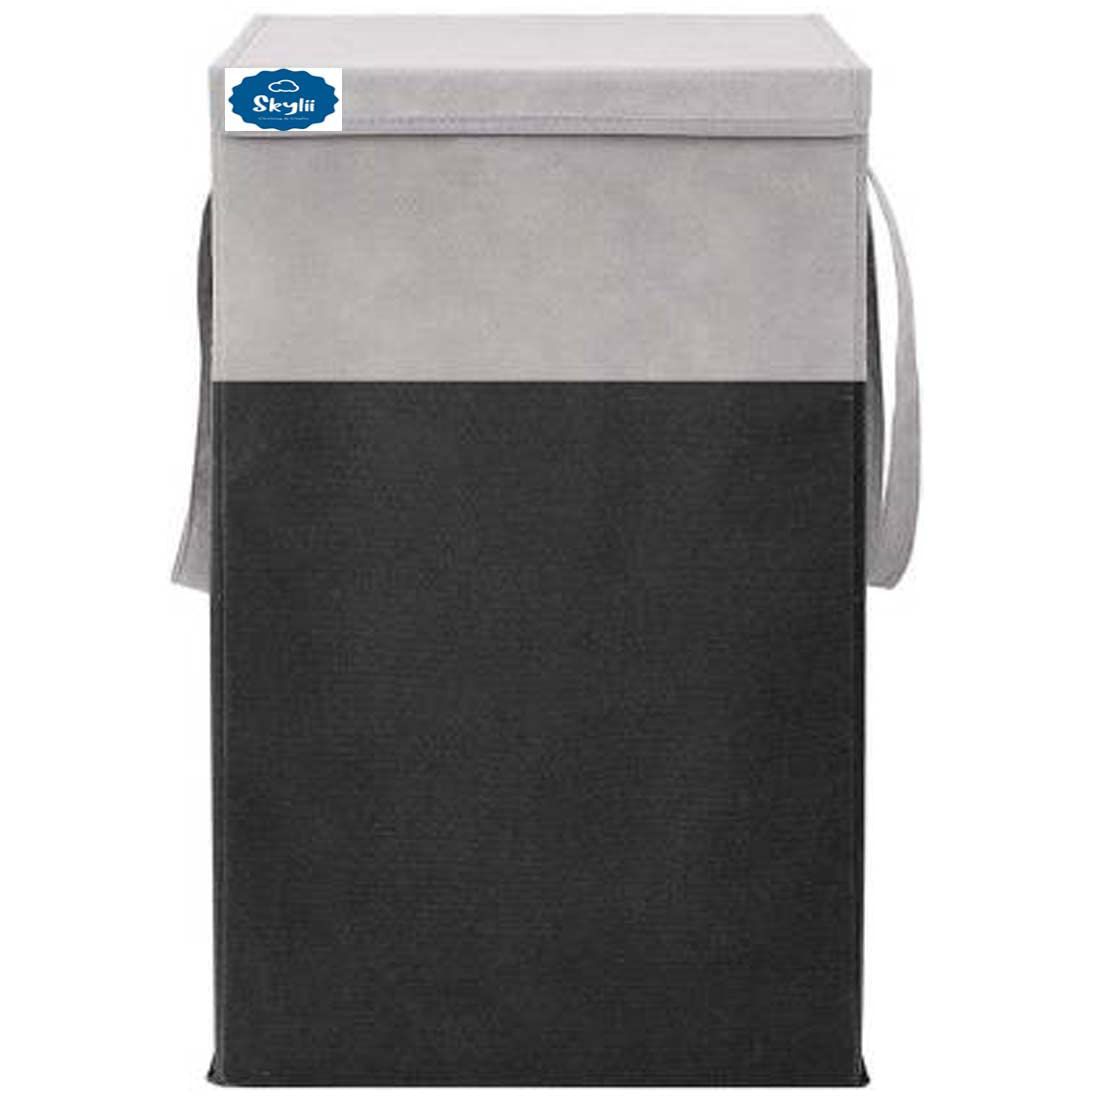     			Skylii - Grey Laundry Bags ( Pack of 1 )